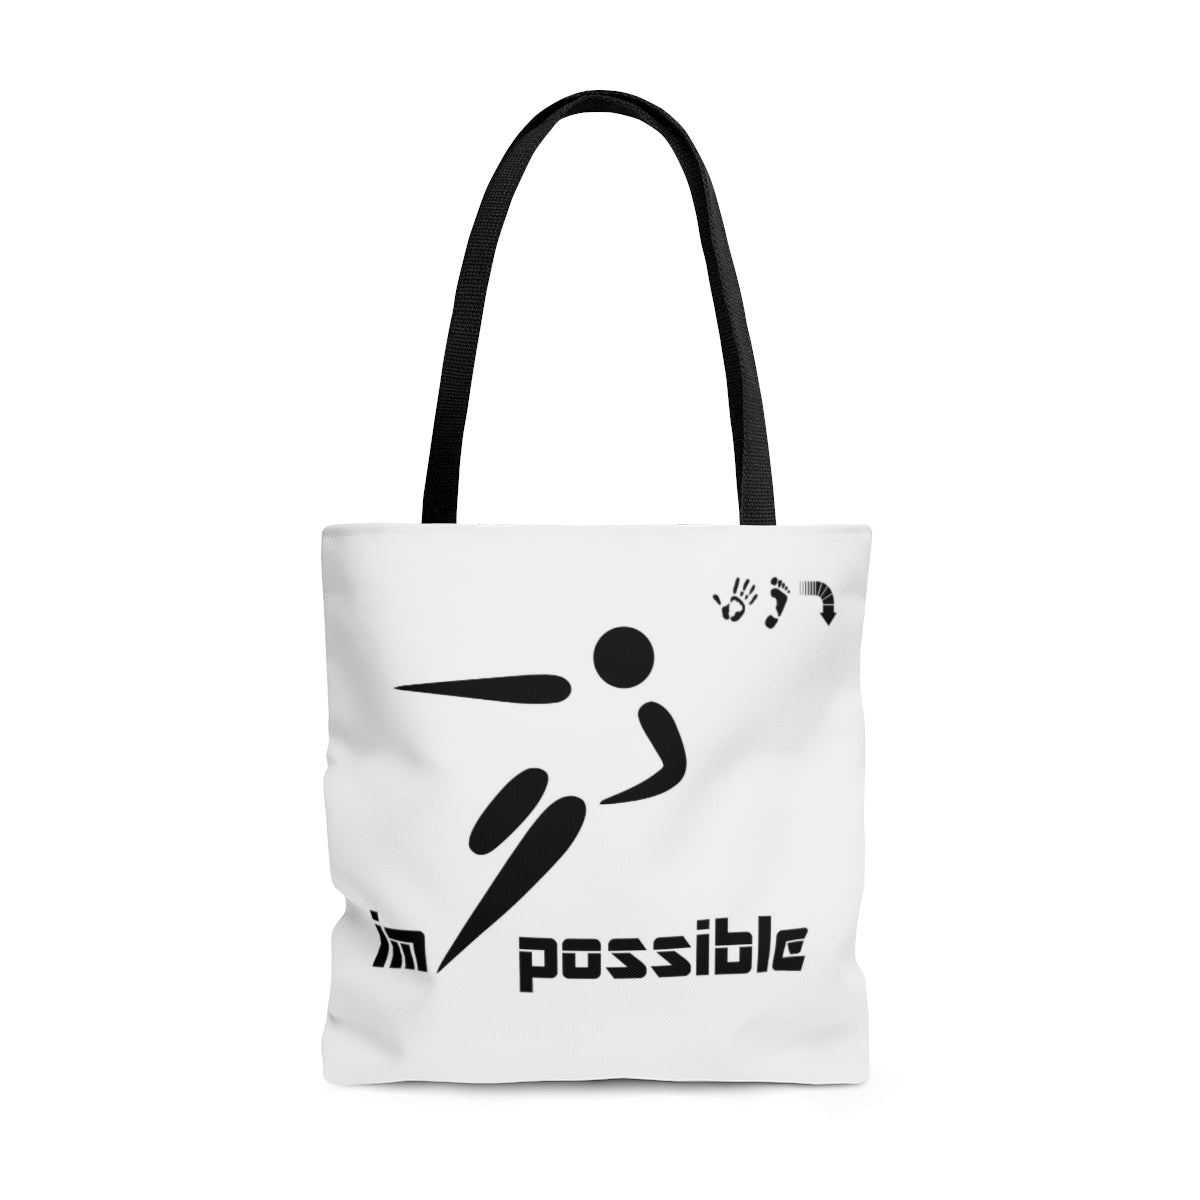 Five Toes Down Possible Tote Bag